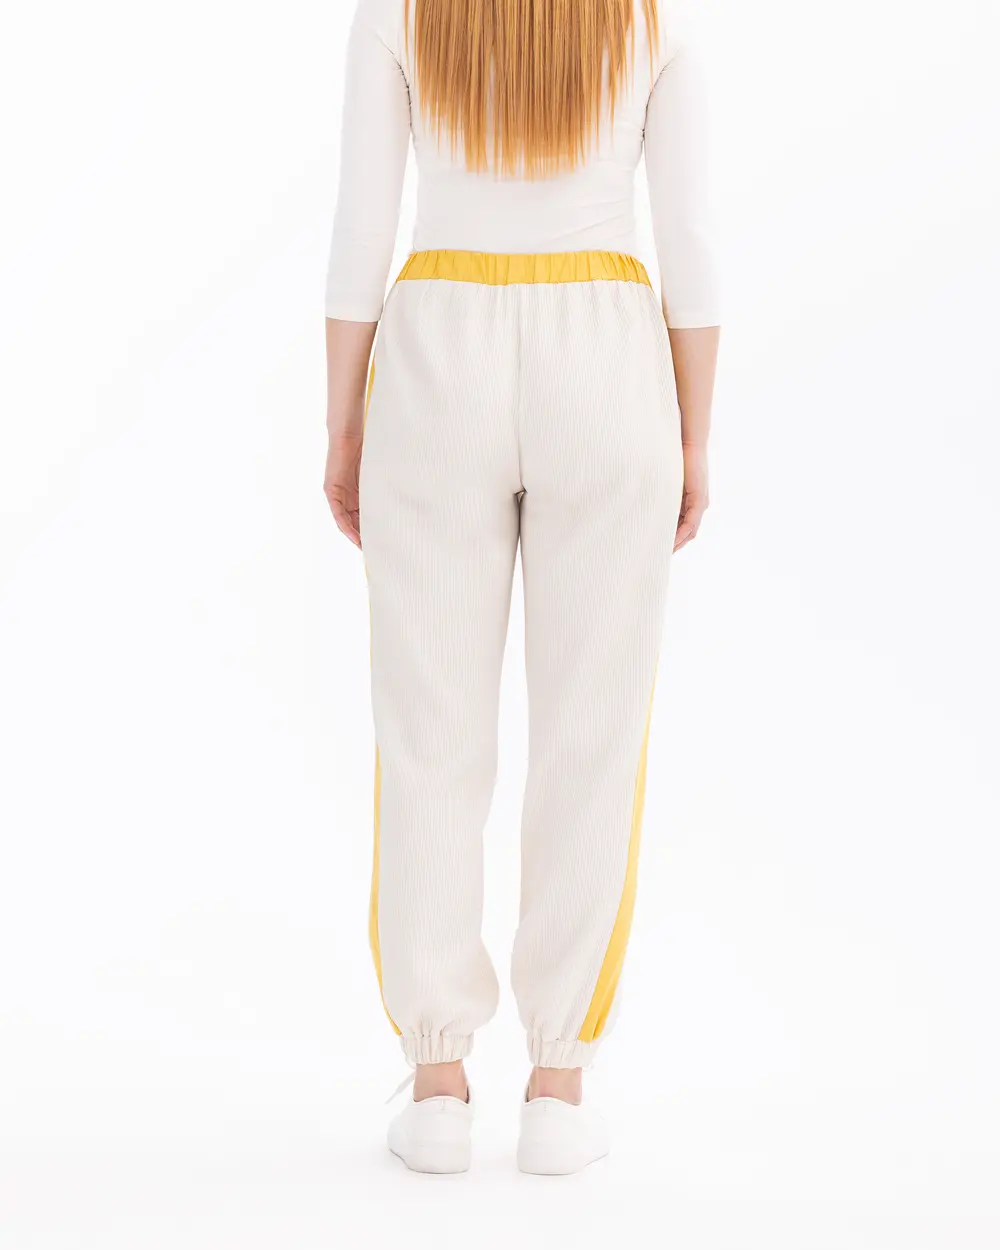 Ankle Length Pants with Elastic Waist Pockets